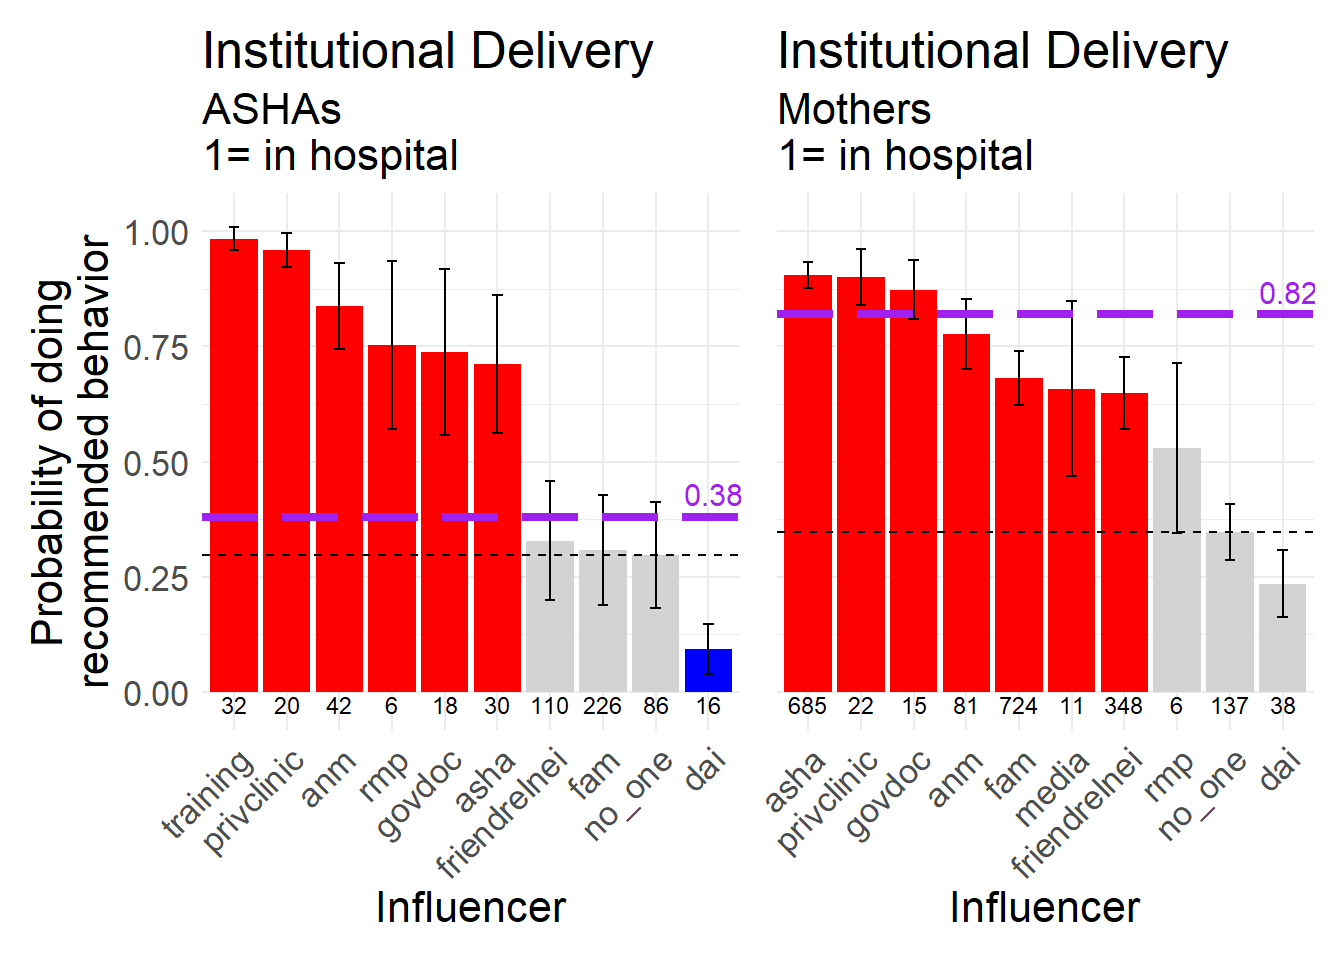 Hospital delivery, a biomedically recommended behavior, 1 = delivered in a hospital.